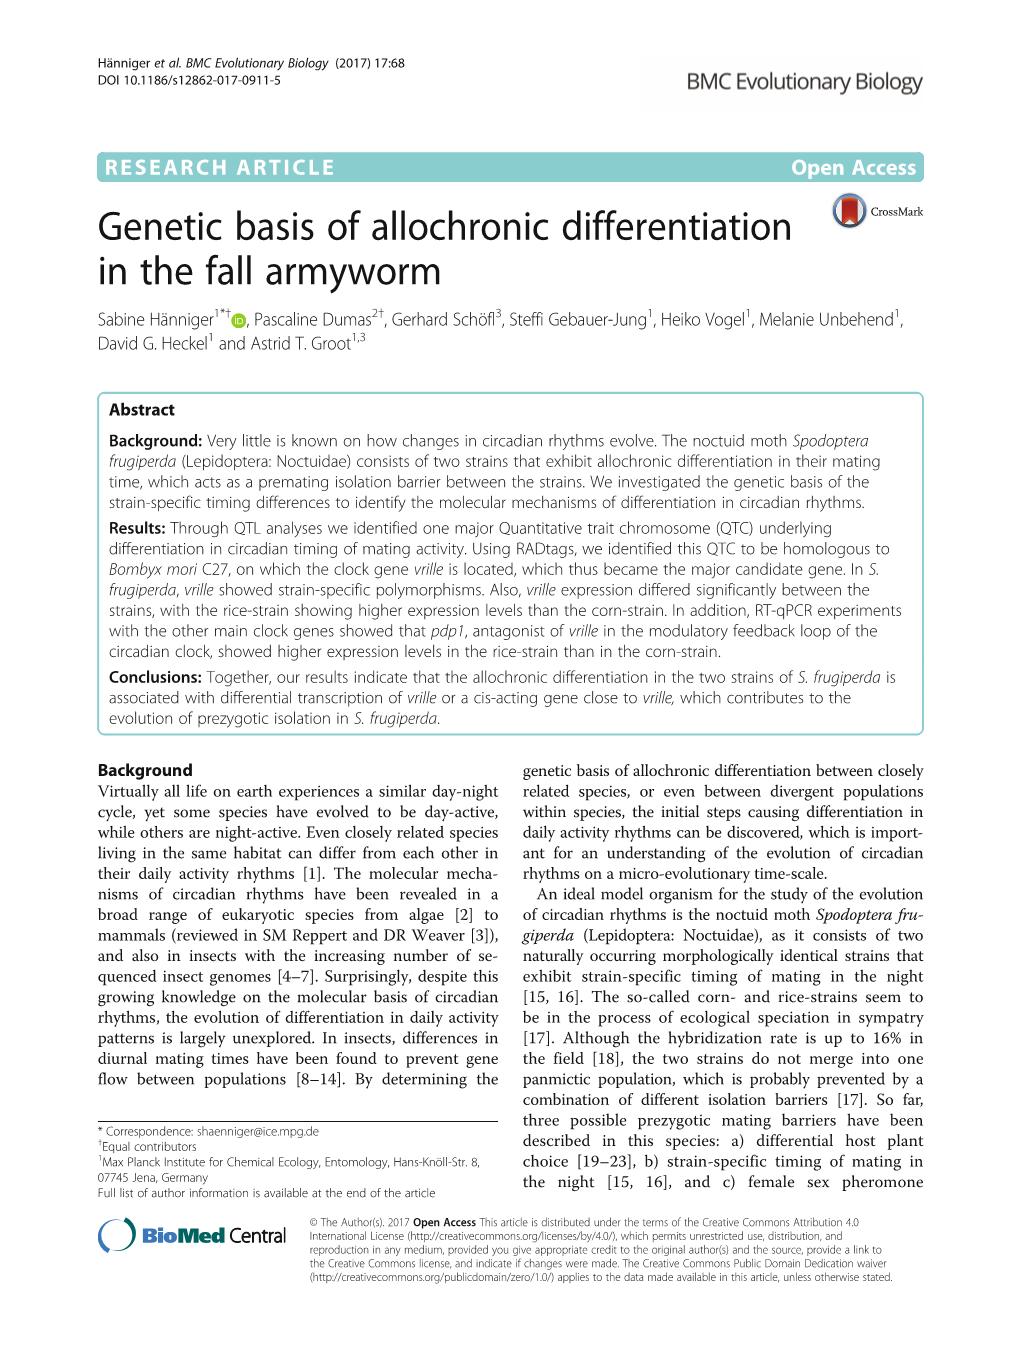 Genetic Basis of Allochronic Differentiation in the Fall Armyworm